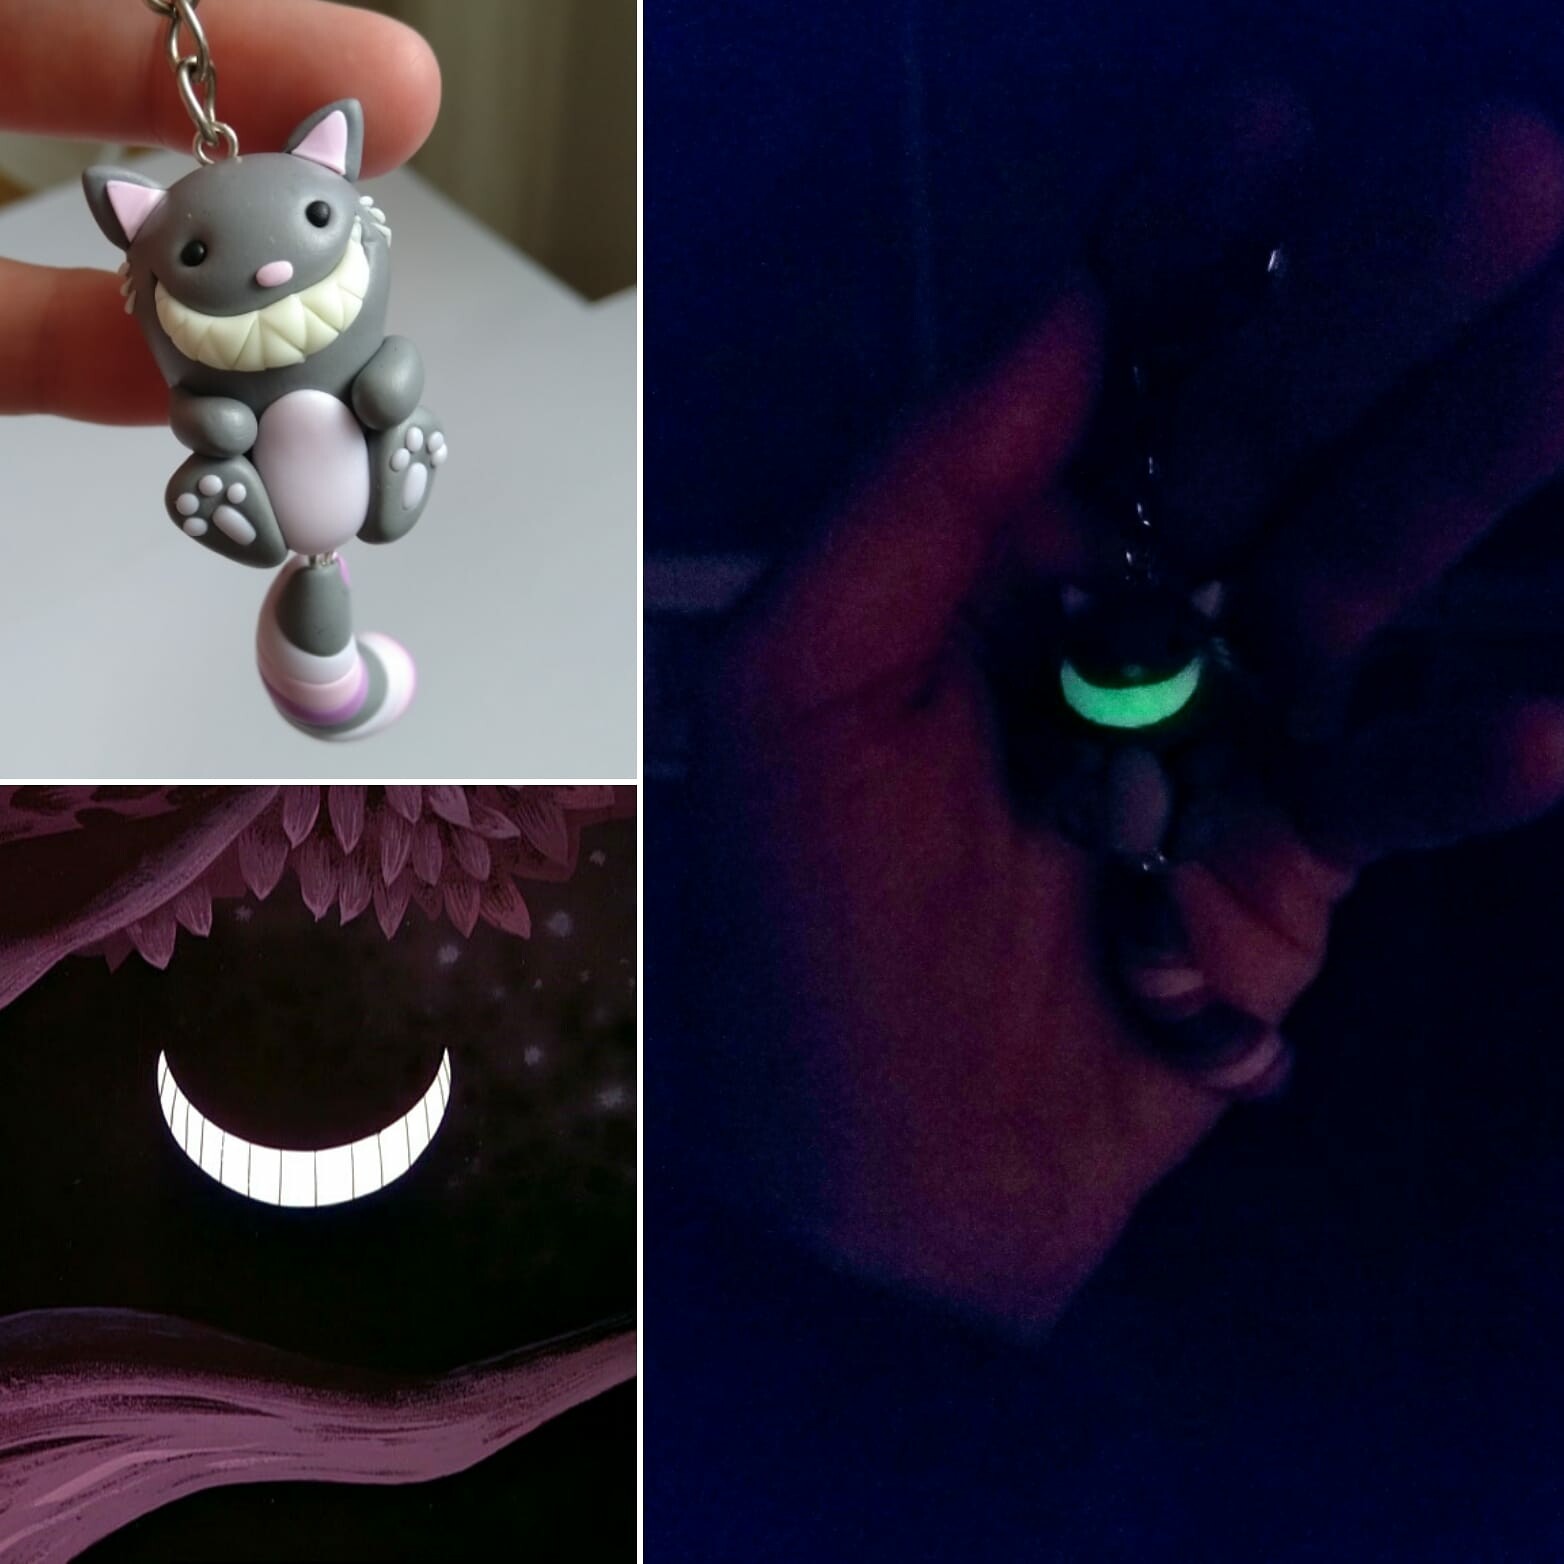 My Cat's smile as compared to the one of Disney's Cheshire Cat